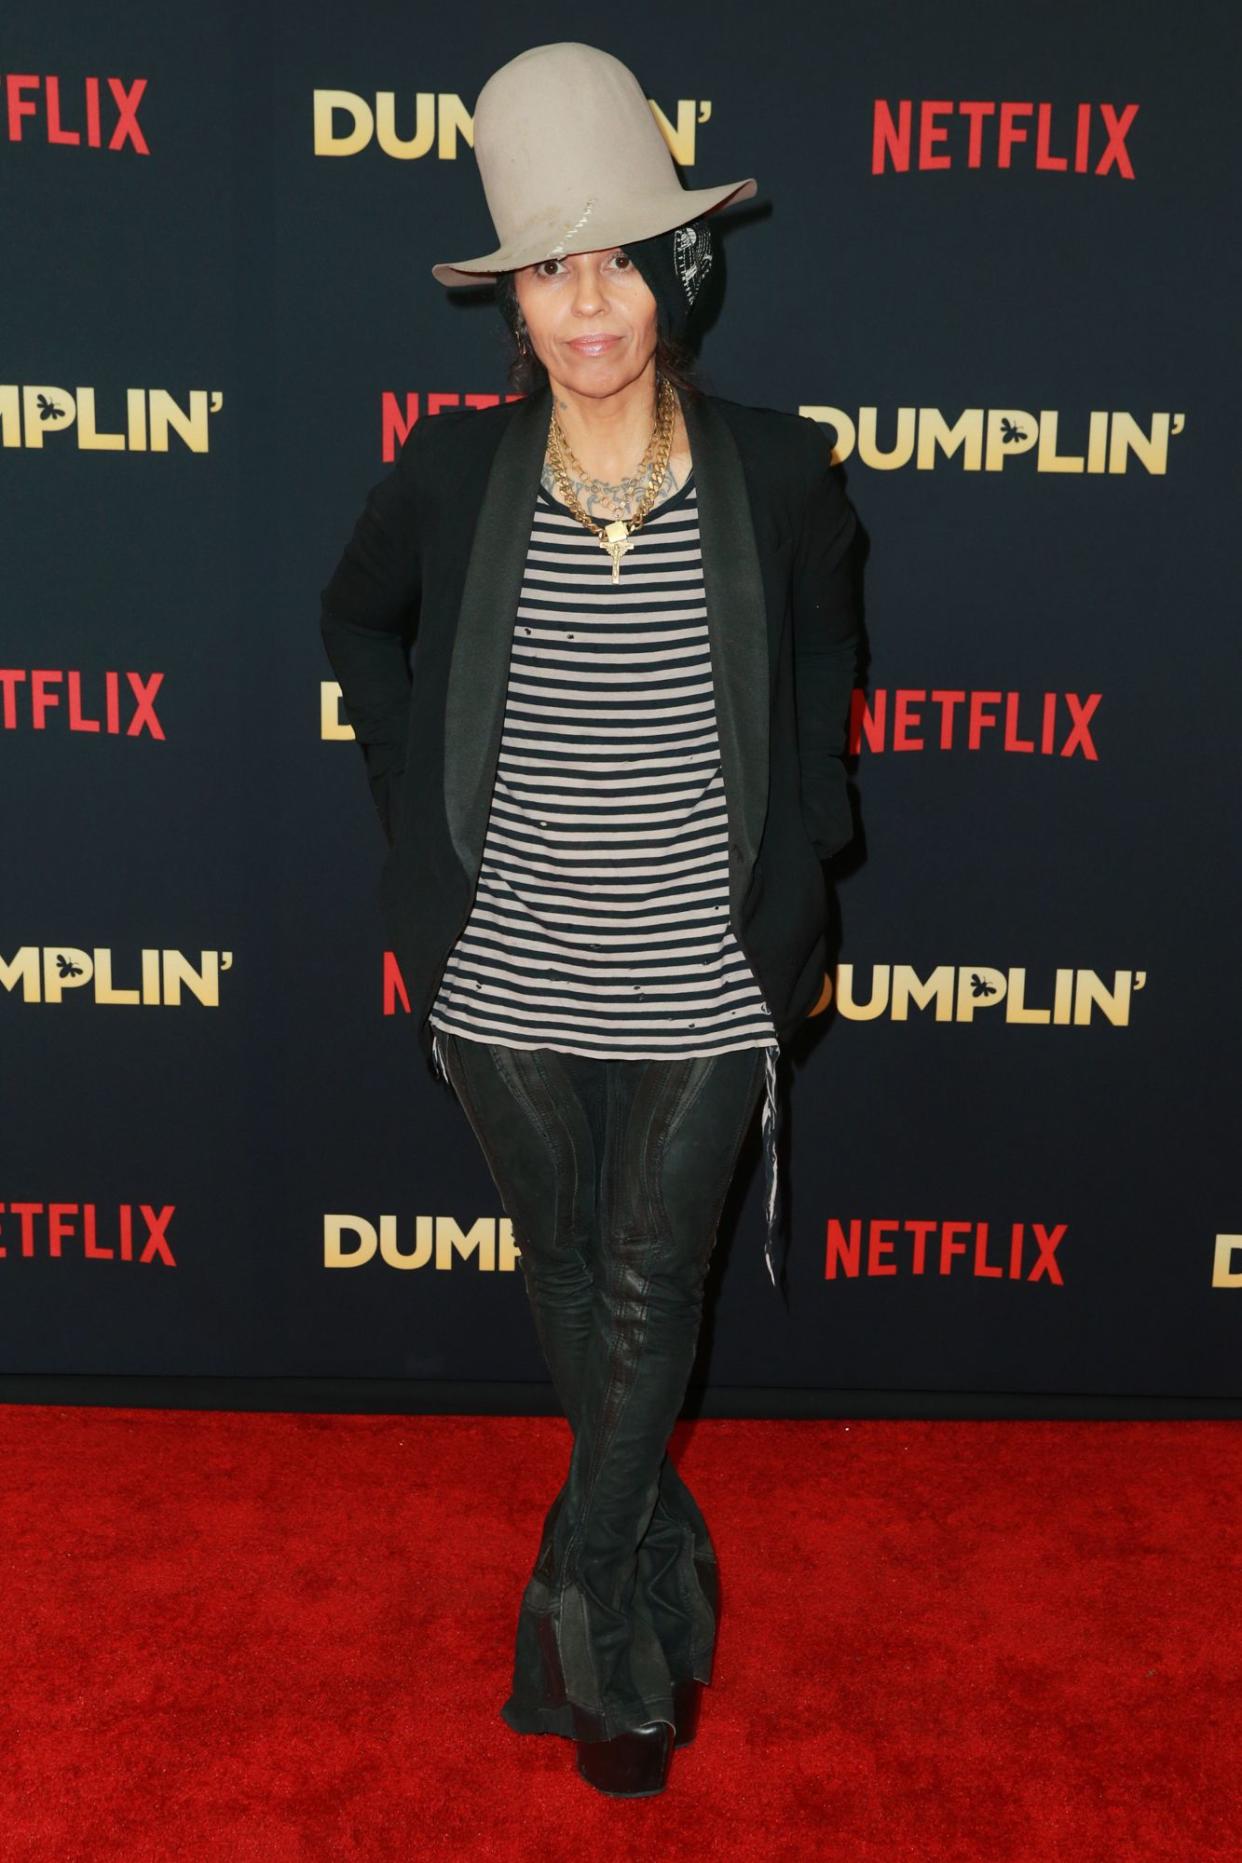 Linda Perry stands on a red carpet wearing a tall grey hat